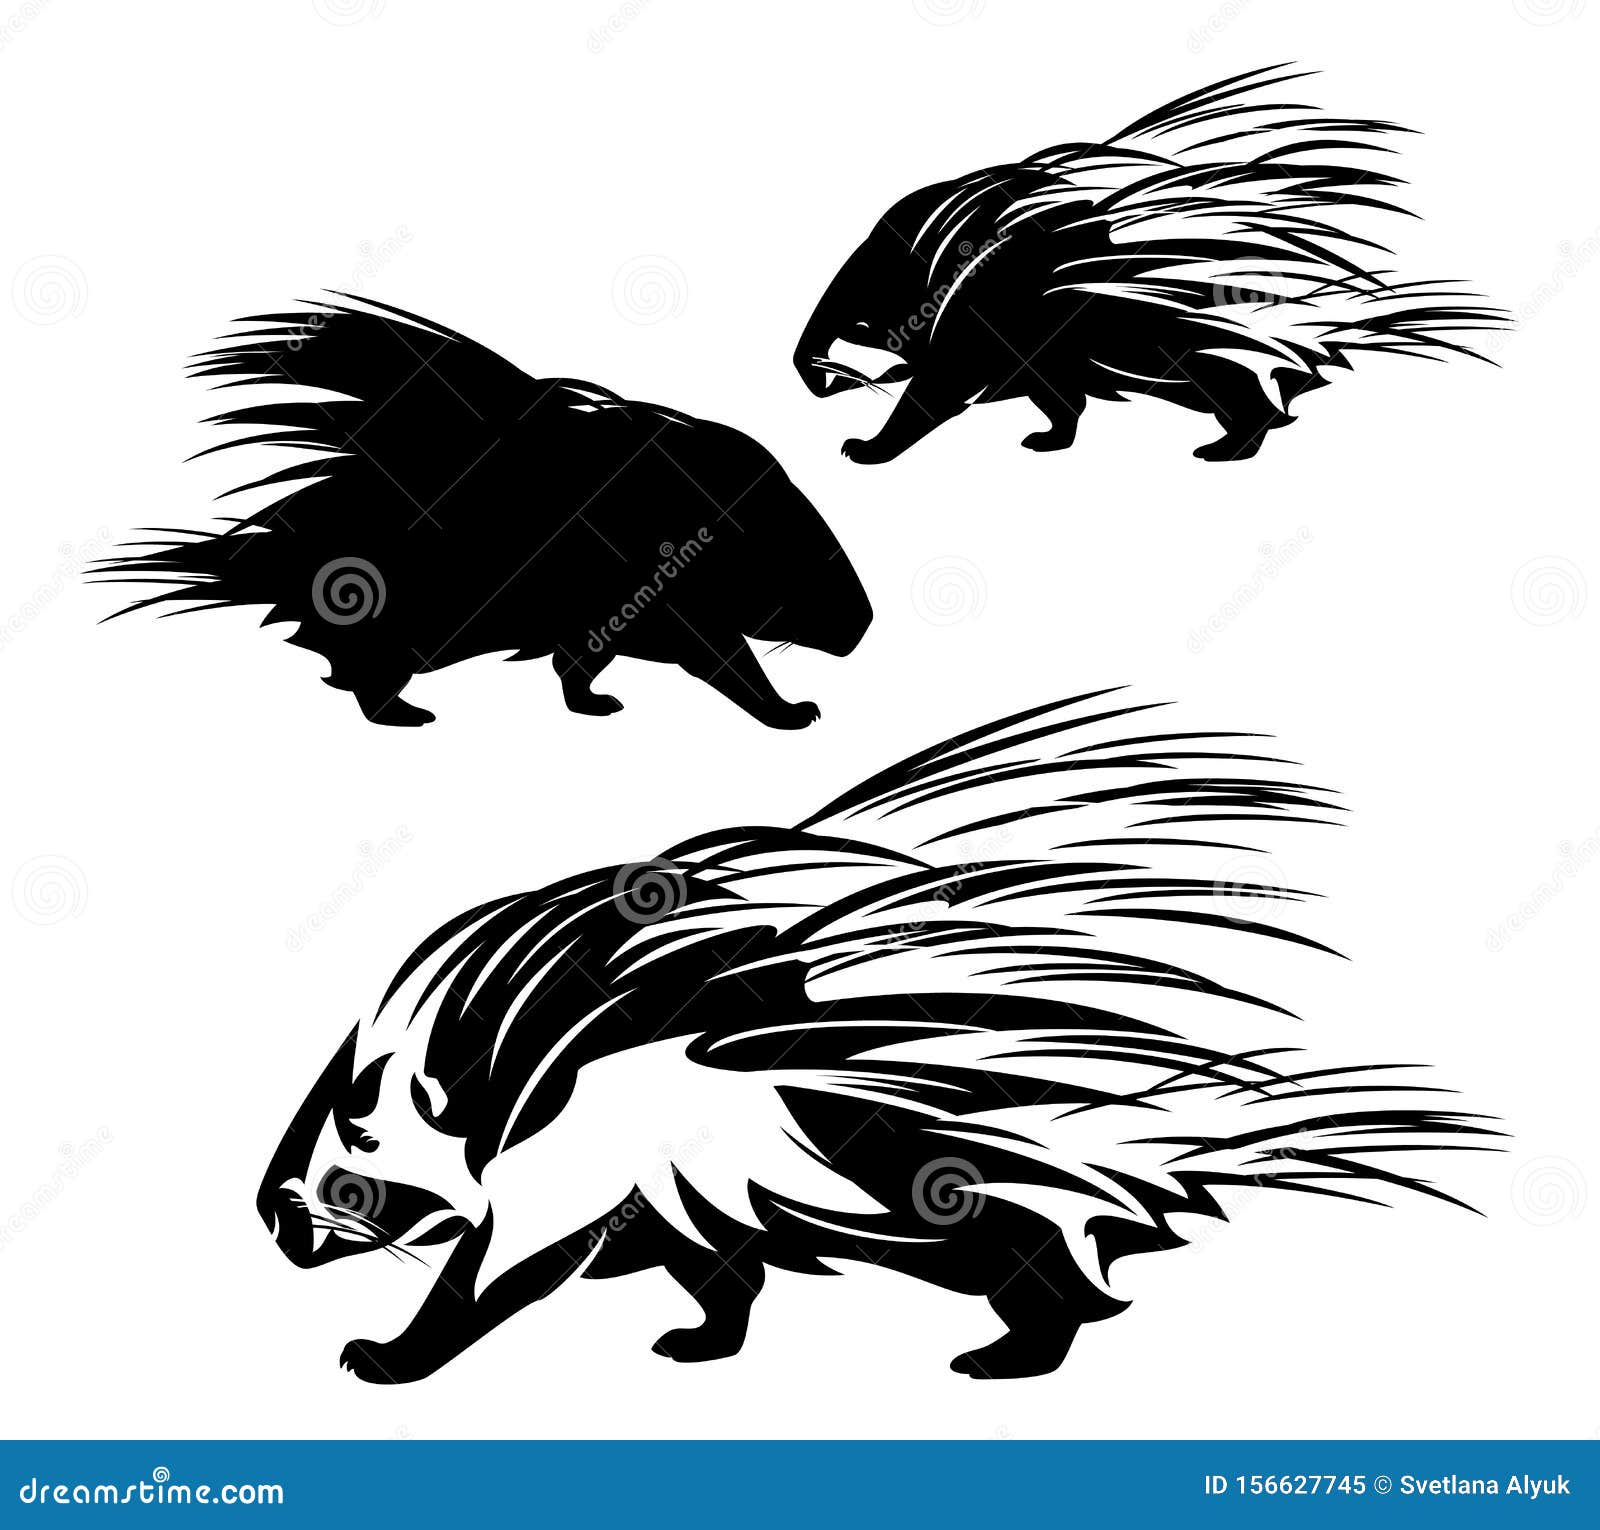 porcupine outline and black  silhouette 